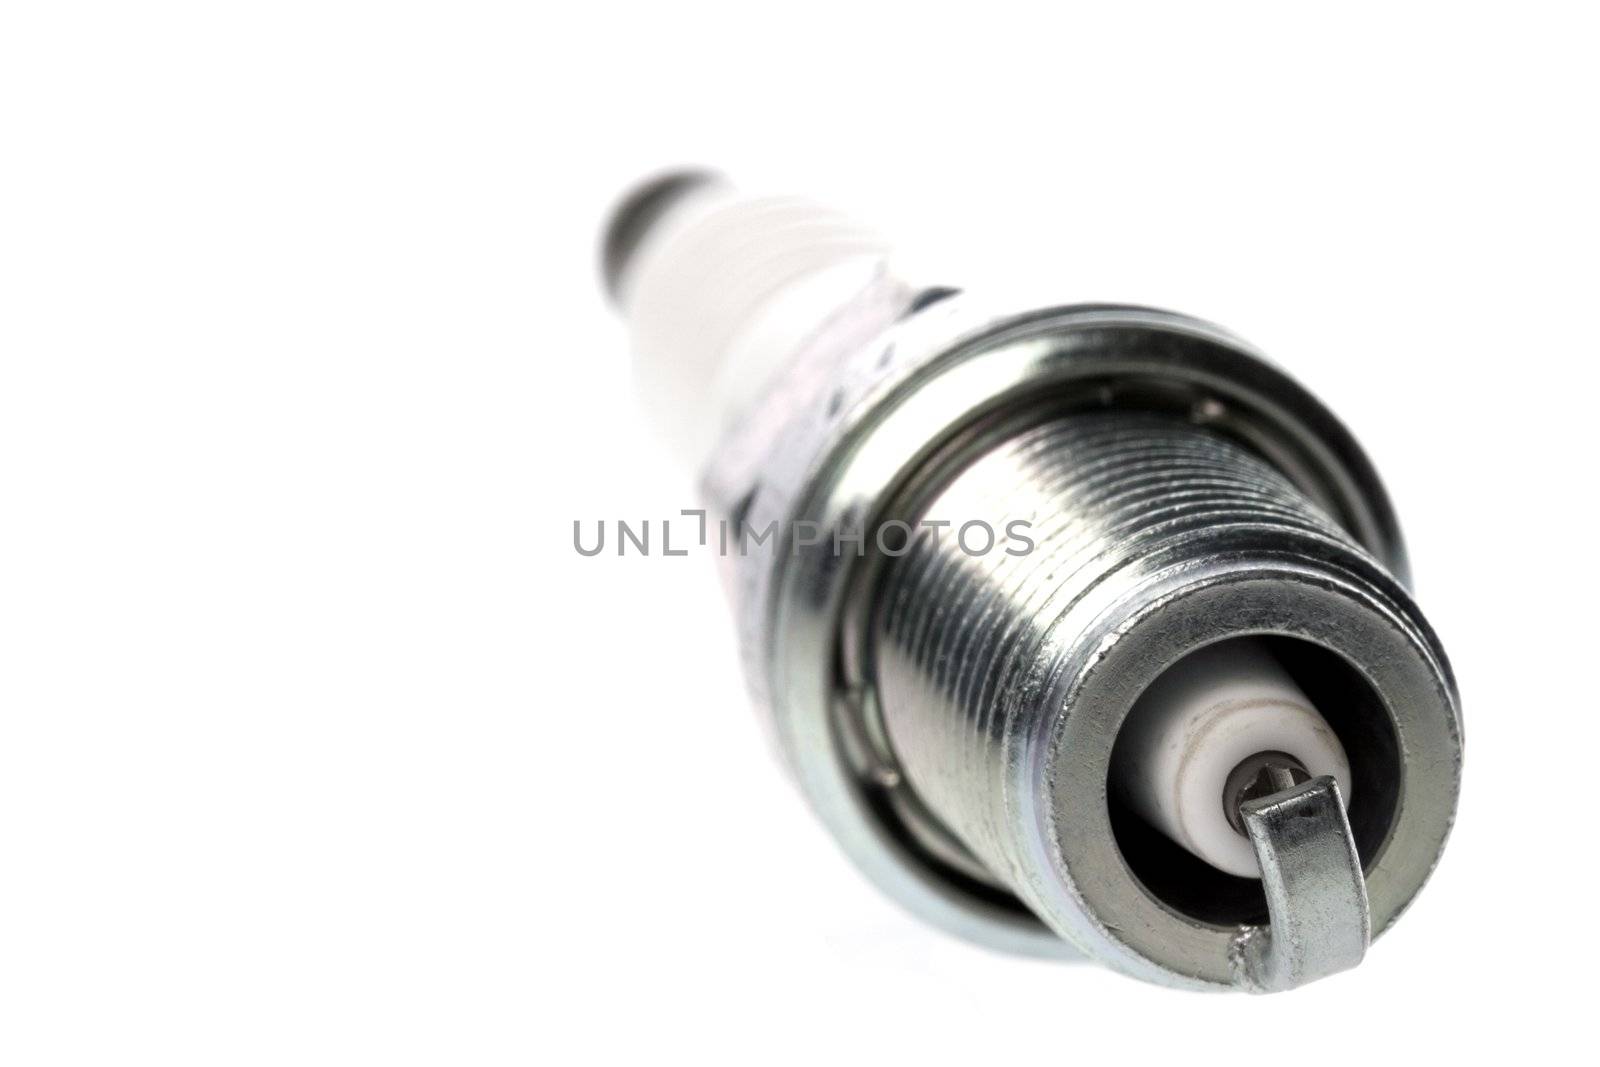 Isolated image of a spark plug.